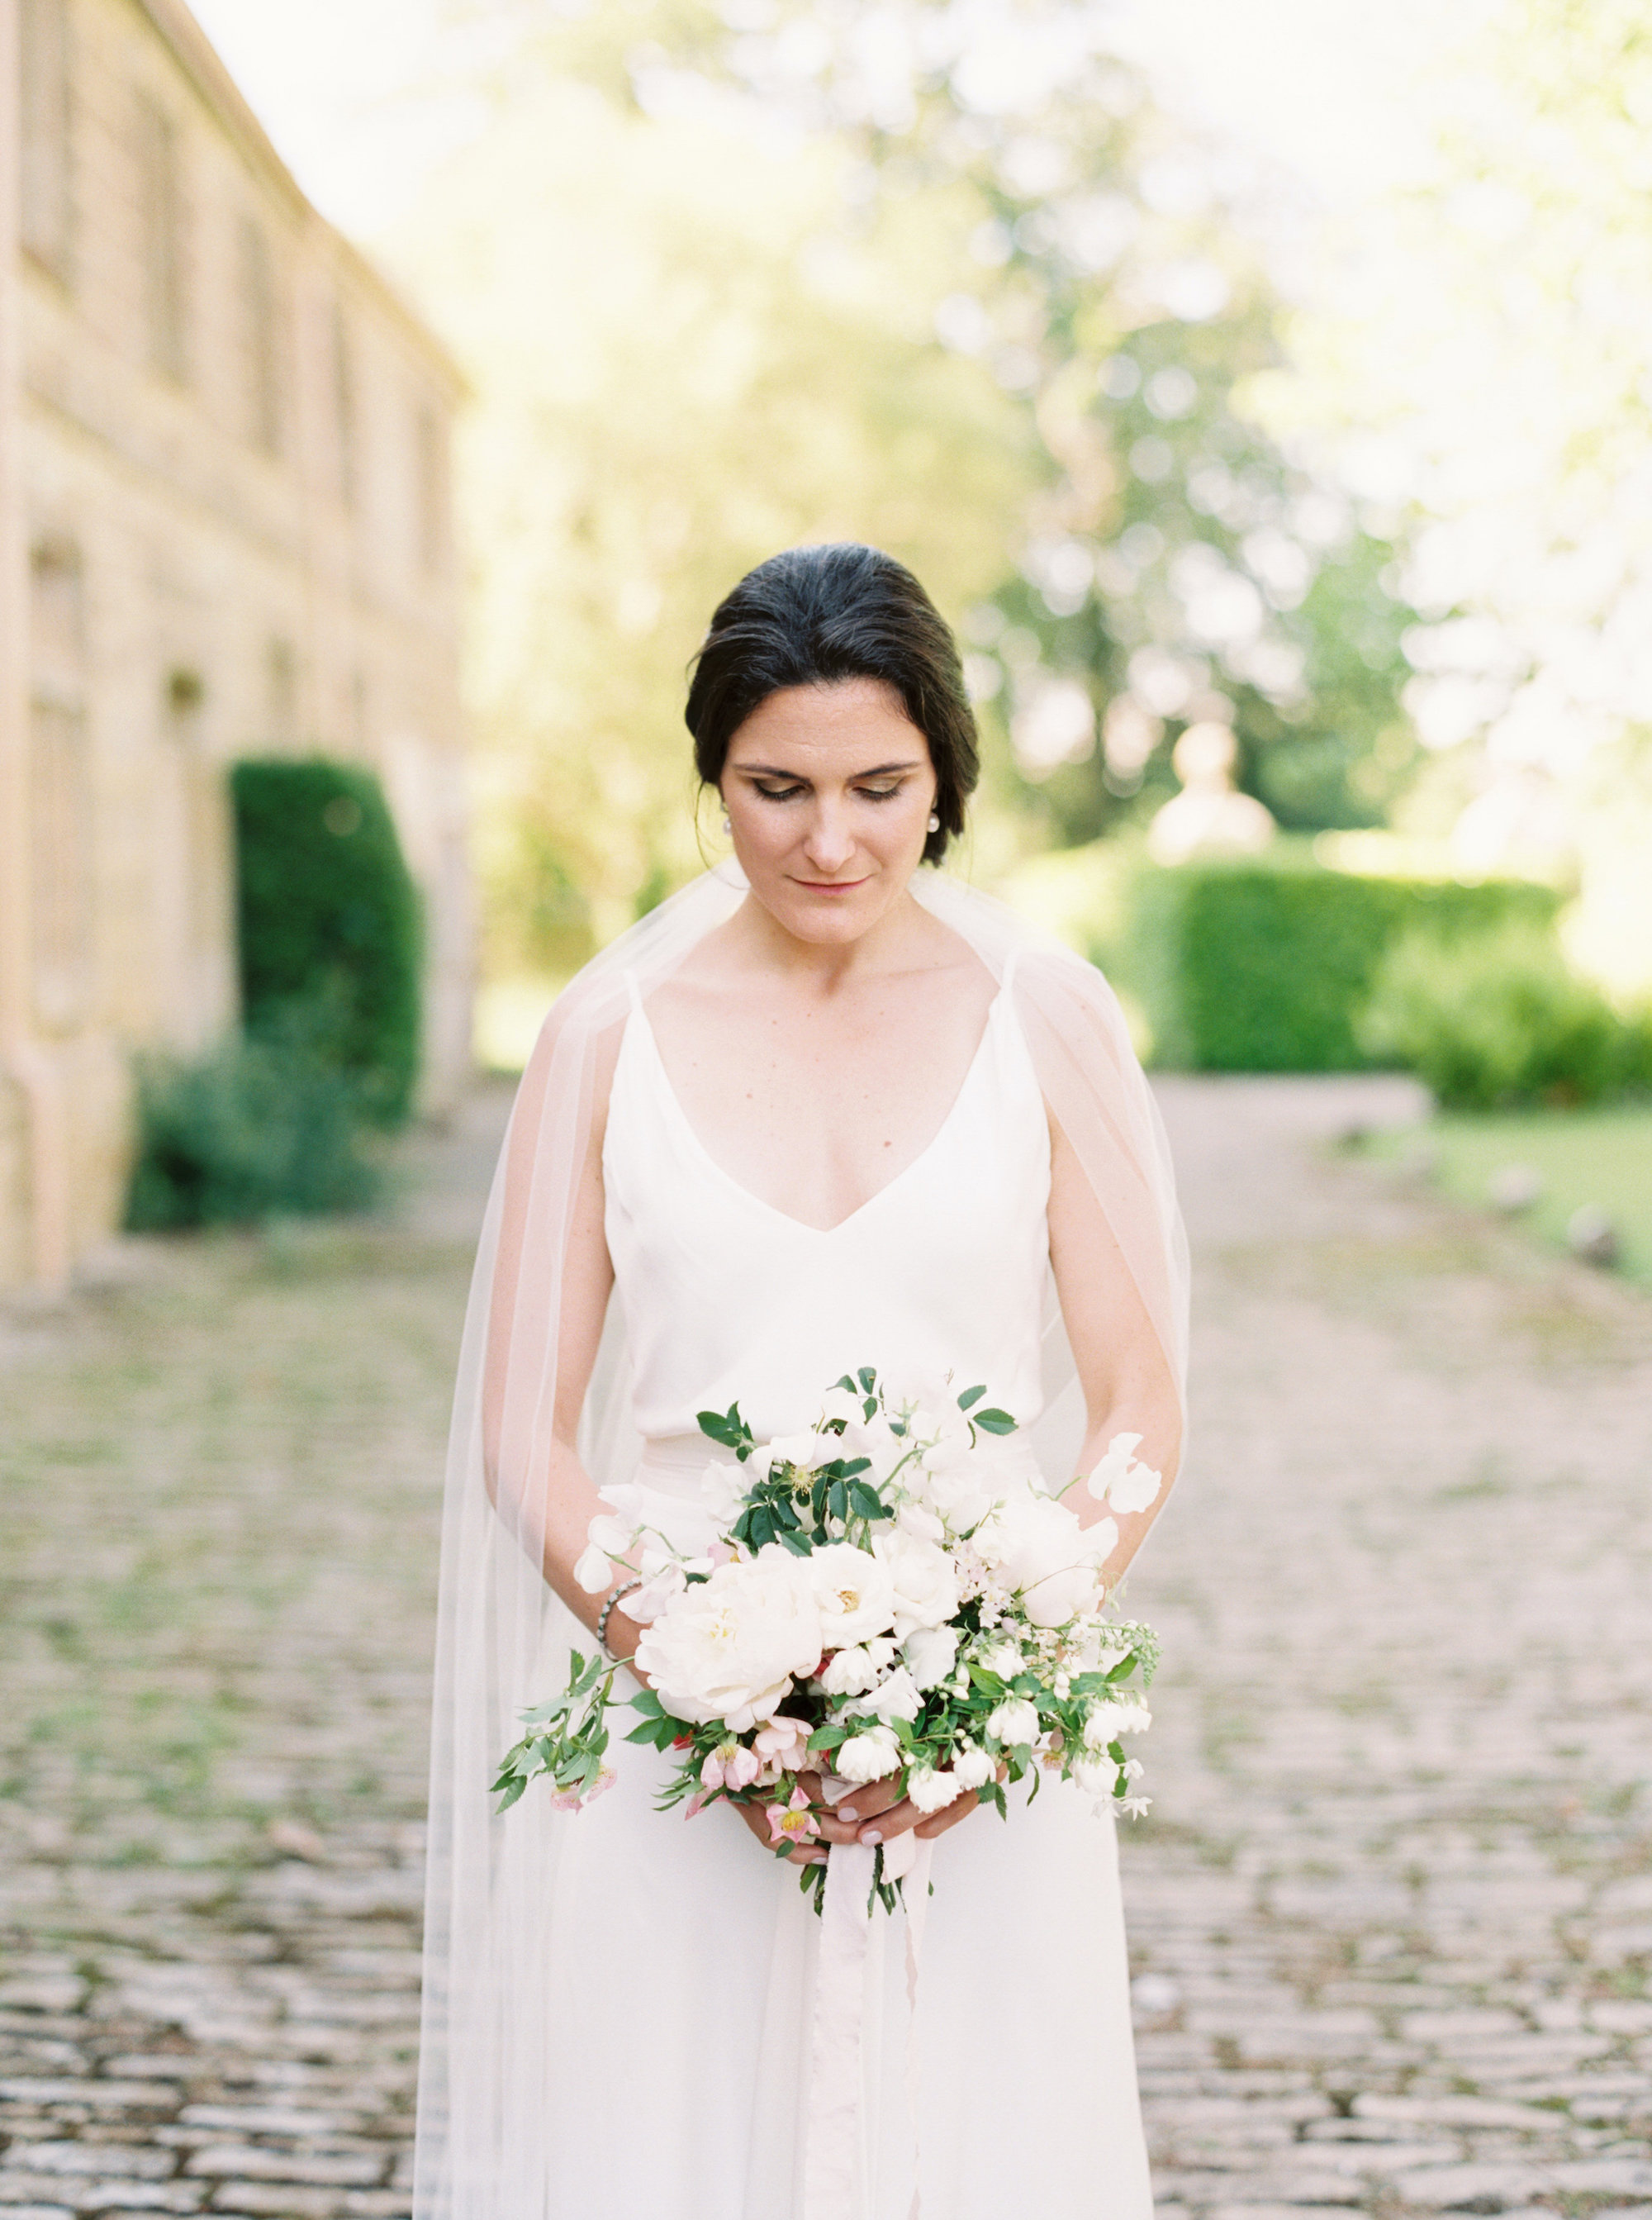 Luxury Wedding Planner UK | Jennifer & Timothy's English Country Manor Wedding | Soft Pink Pale Blue White and Silver Toned Green Neutral Tones American Bride North Cadbury Court | Nicole Colwell Photography  0046.jpg